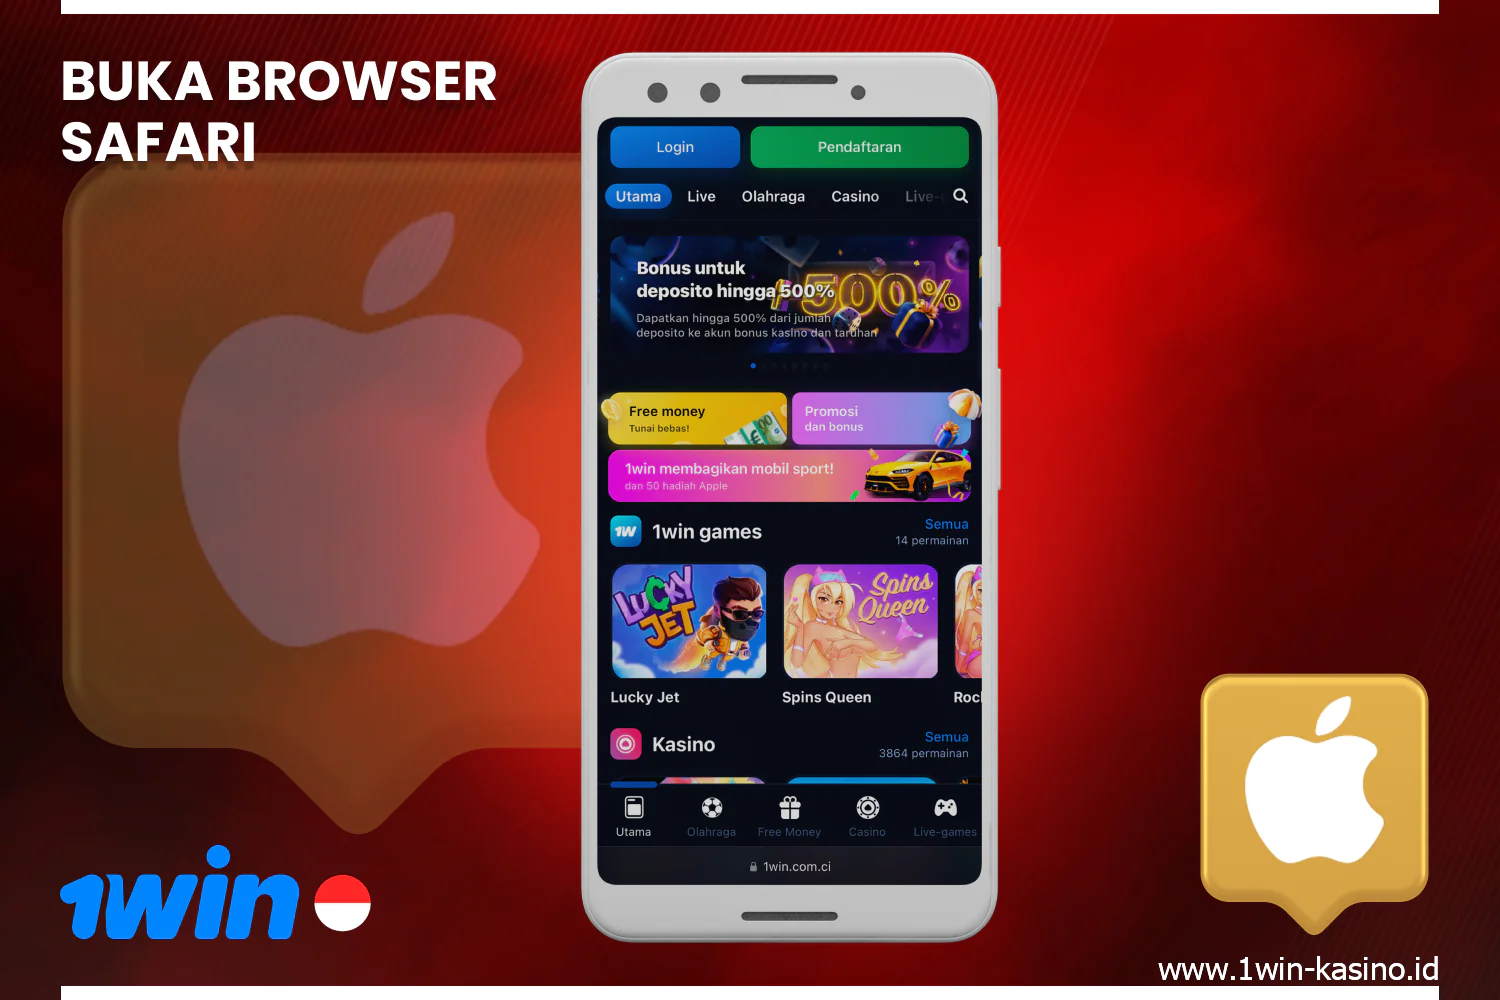 To install the 1win app, use Safari to visit the website